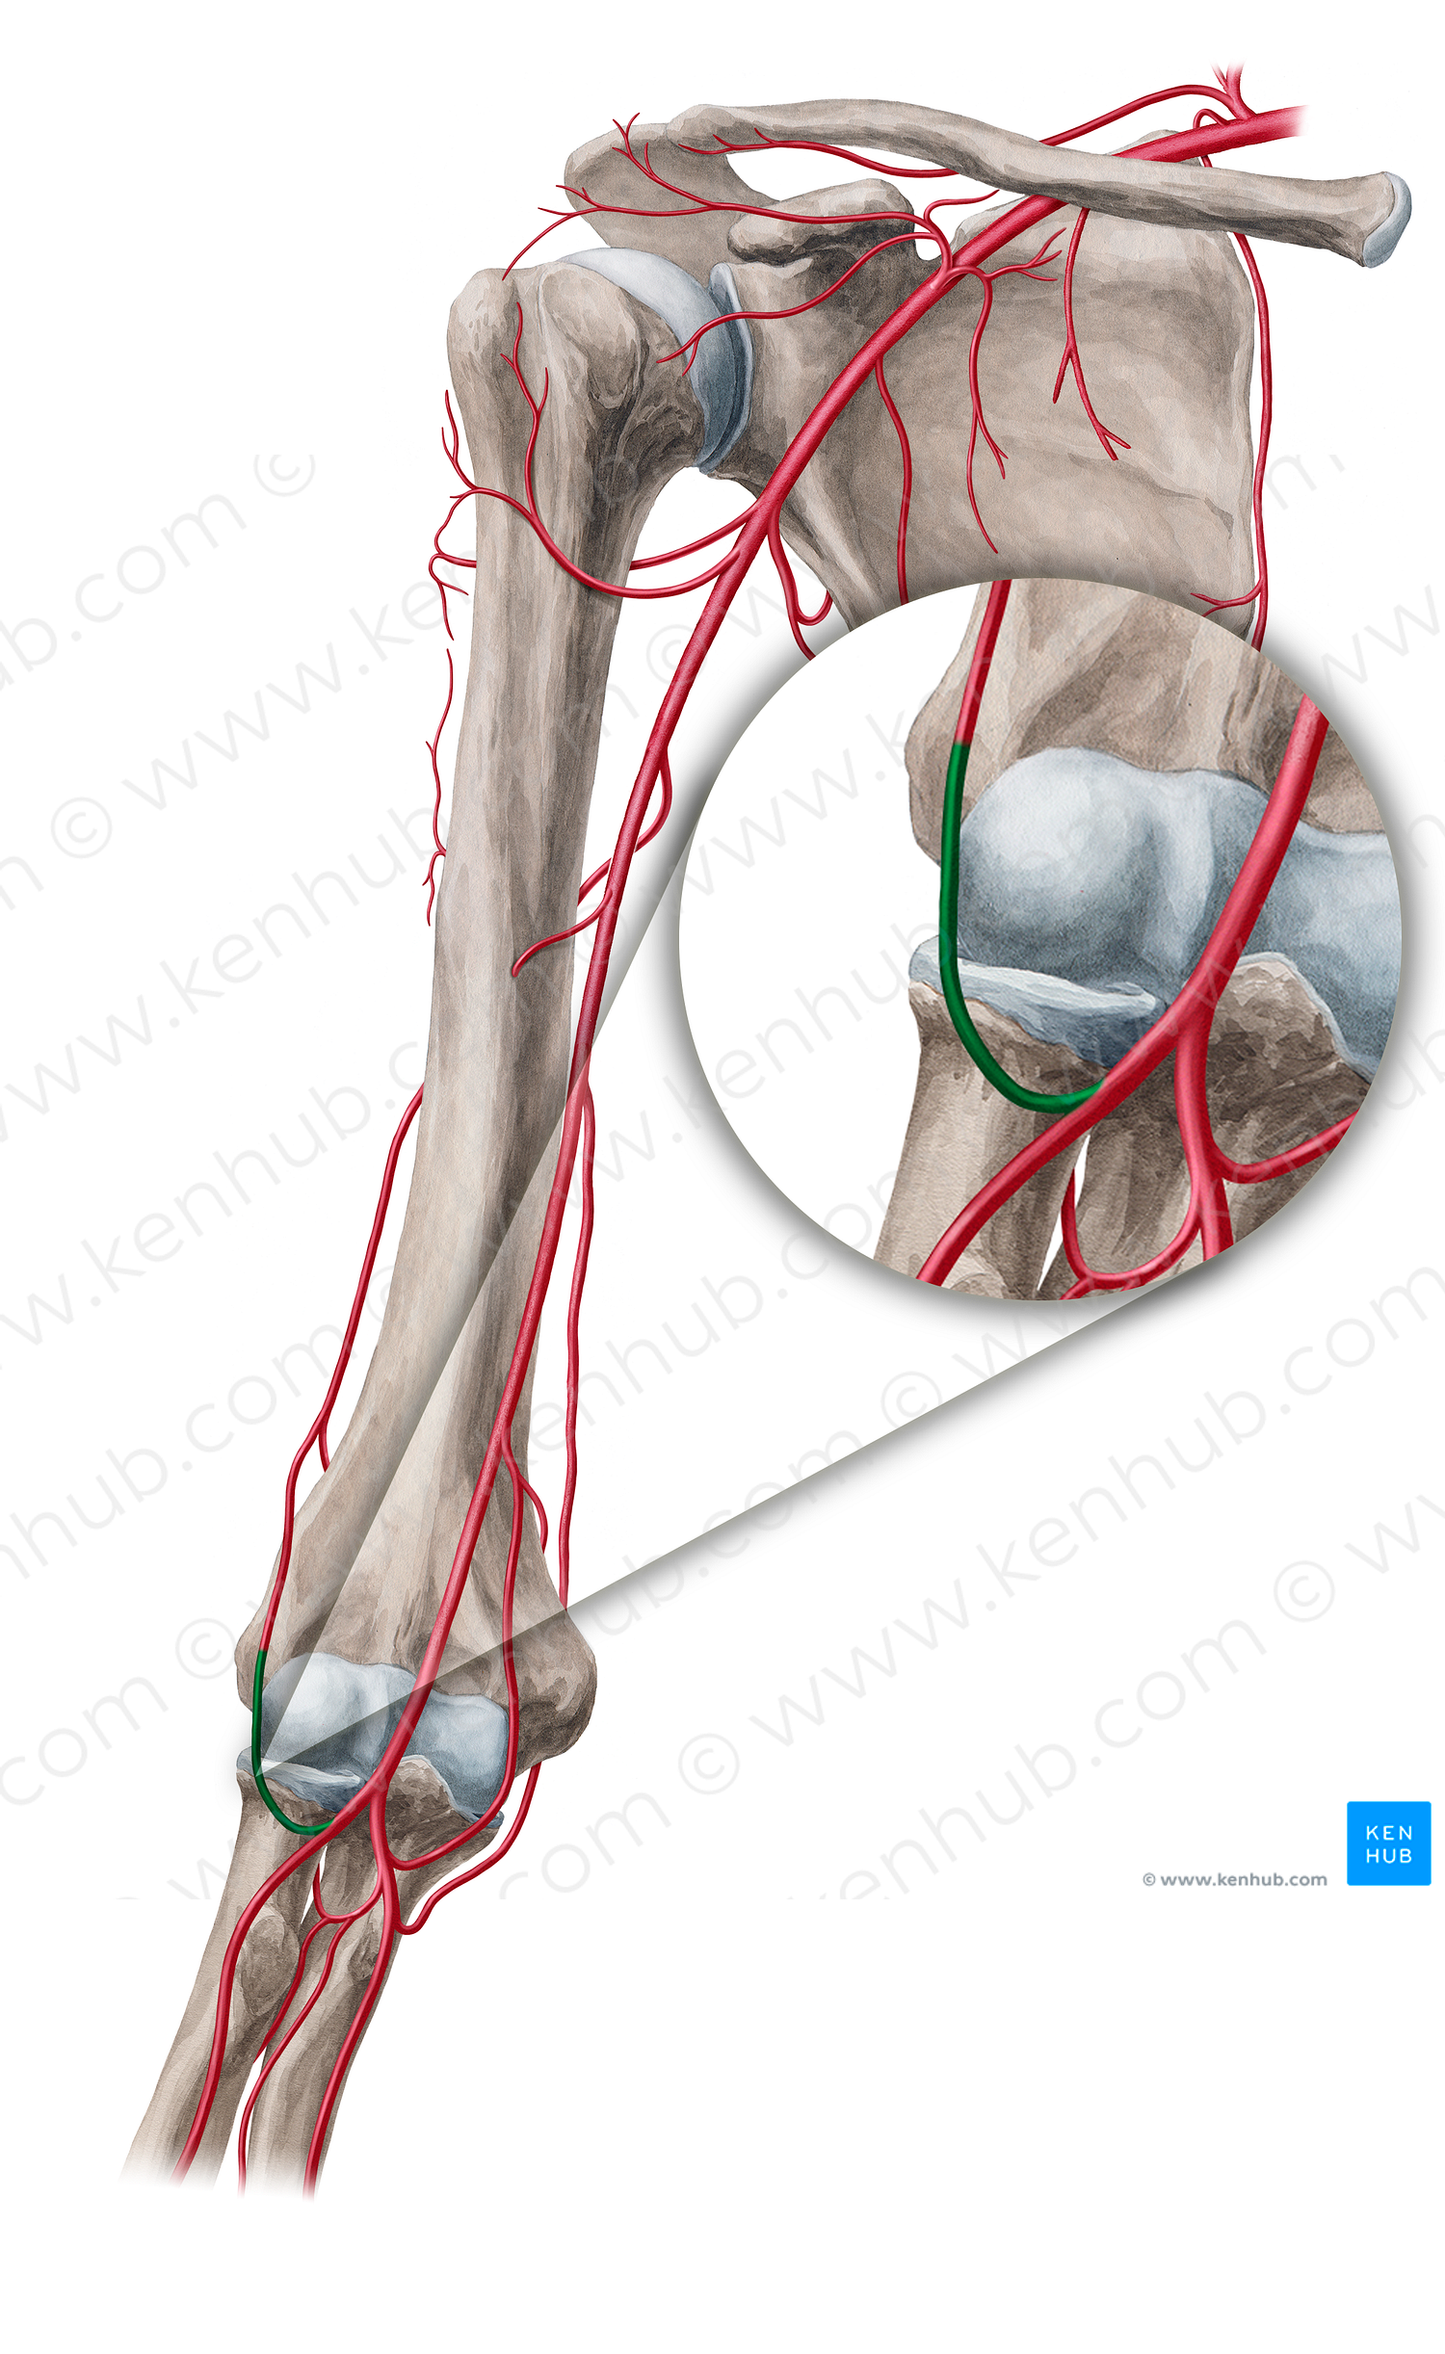 Radial recurrent artery (#18859)